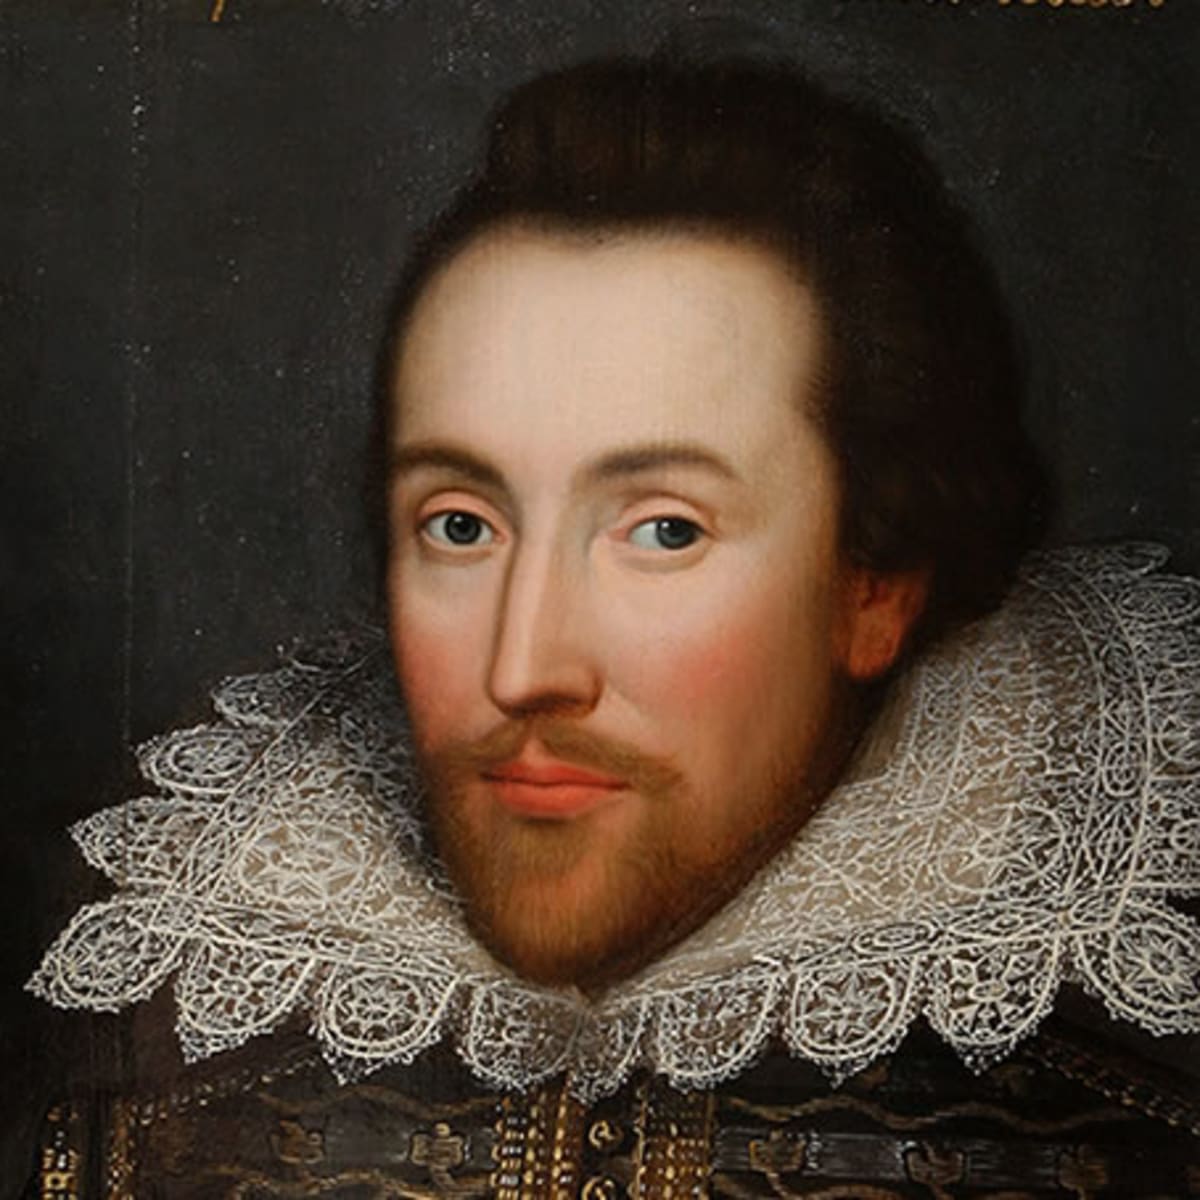 Shakespeare – The Great Playwright Dies